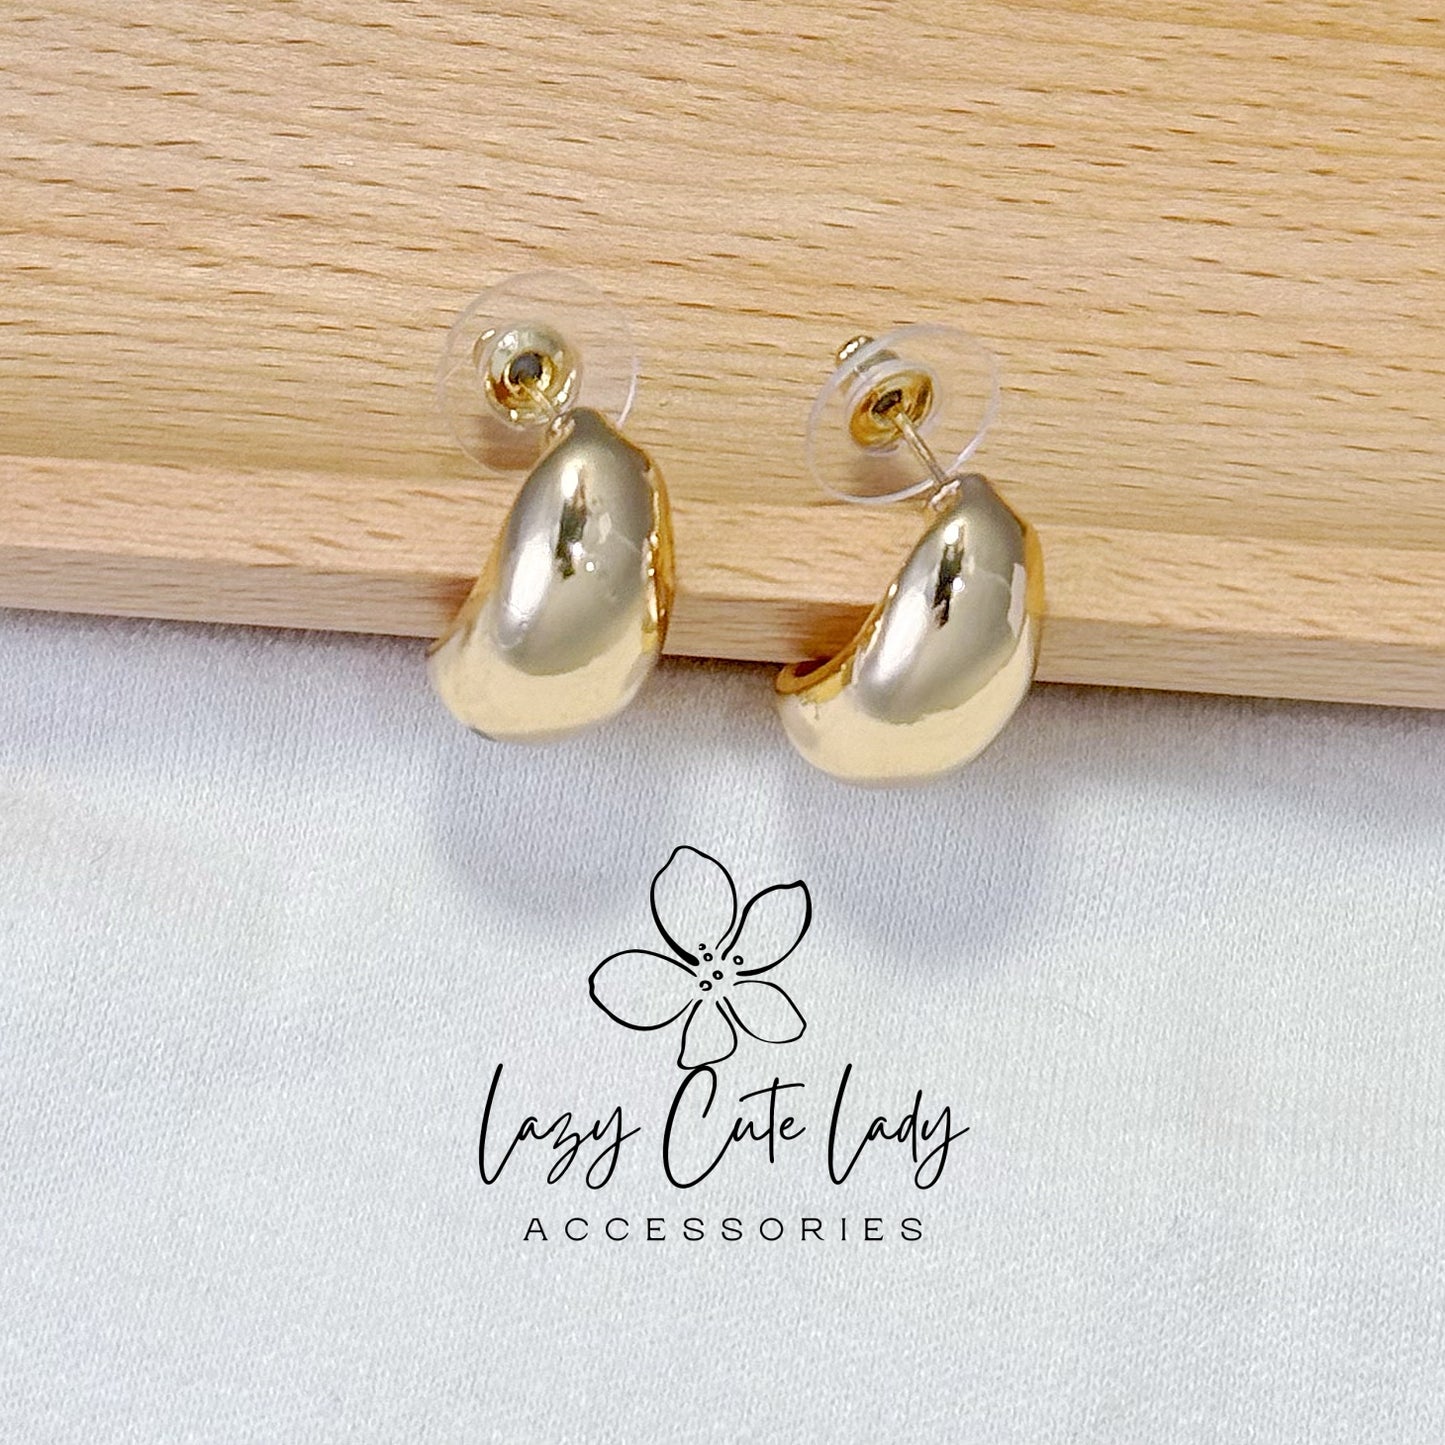 Lazy Cute Lady Accessories-Elegant Gold Metal Earrings: Oval and Square Options-Metal allergy-friendly earrings -Fashion Earrings- Gift - for girl for women